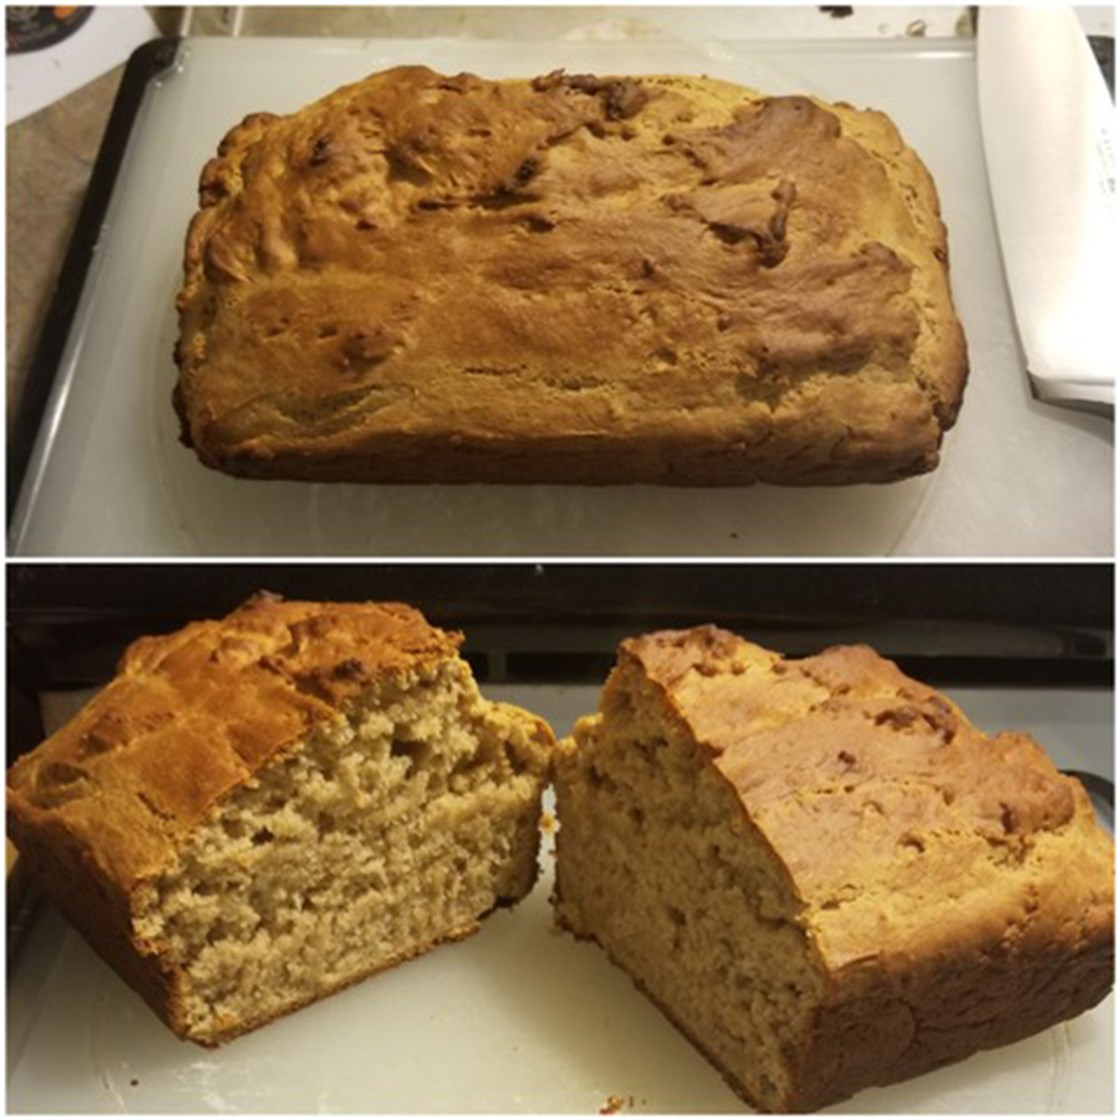 How to Make This No-Yeast Peanut Butter Bread That’s Going Viral